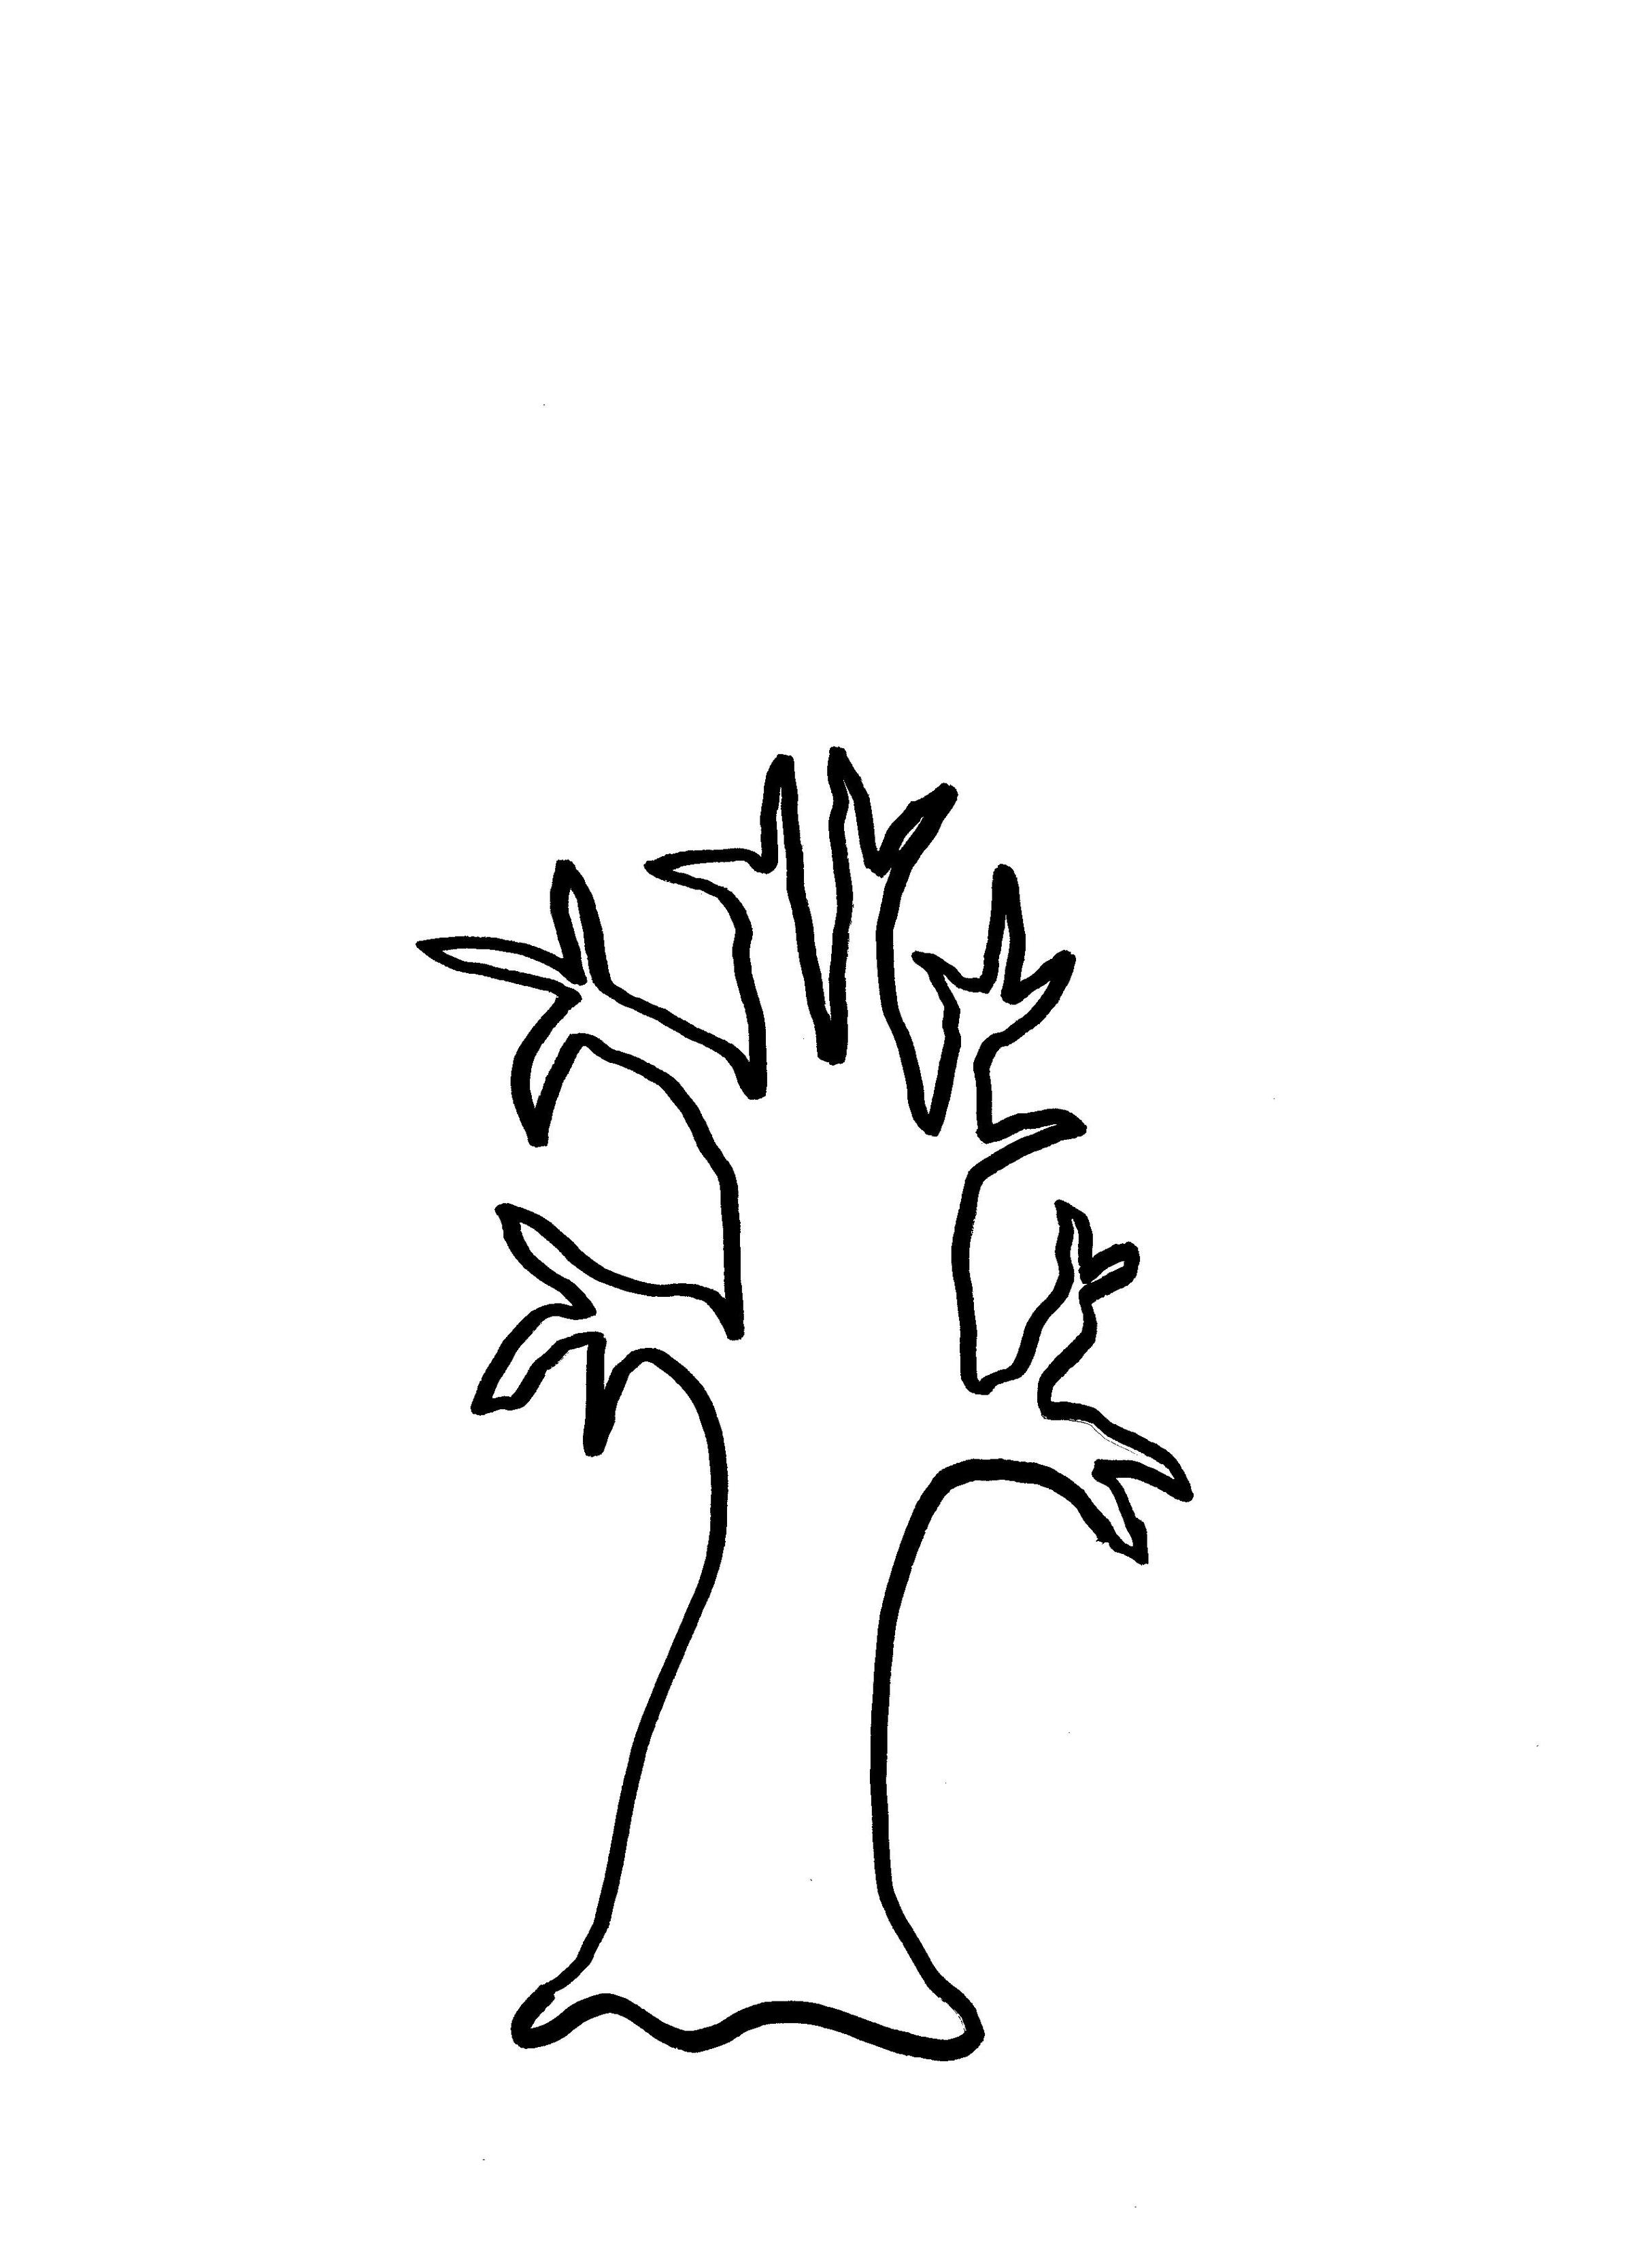 Family tree trunk clipart black and white